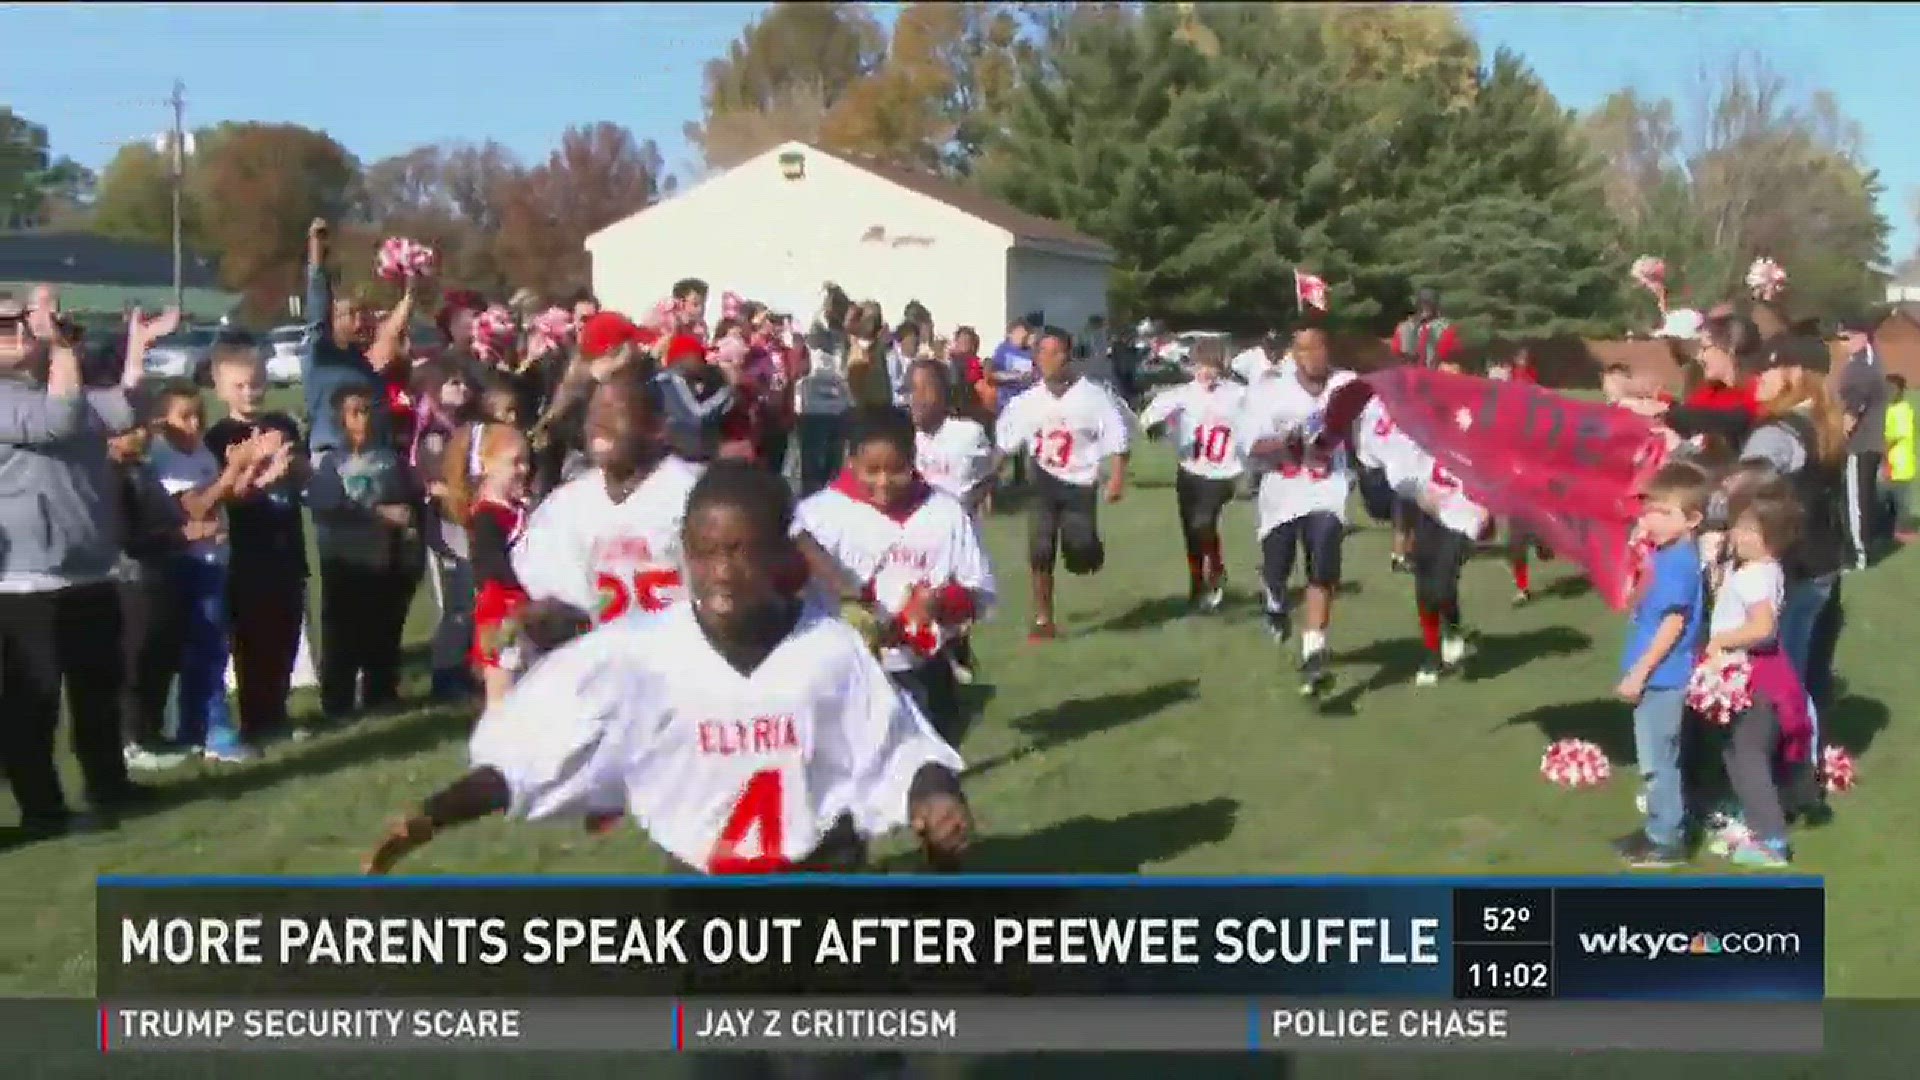 Parents are speaking out after a peewee scuffle.